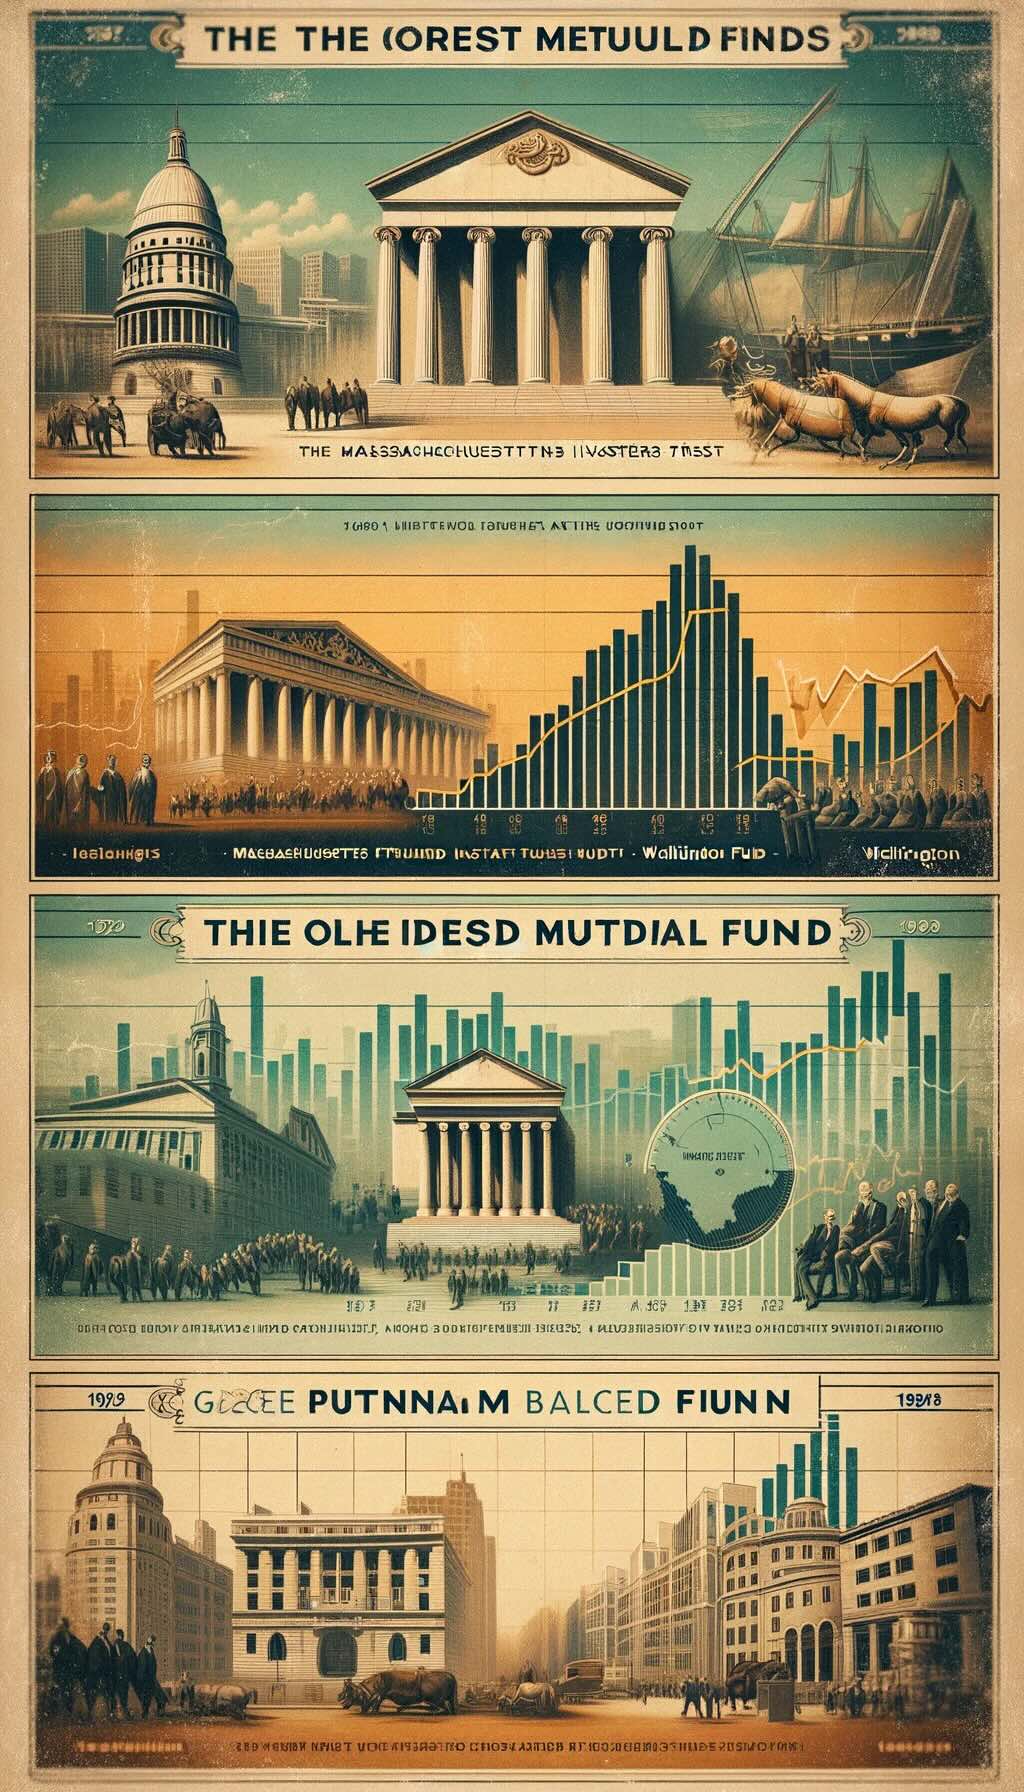 Evolution of the oldest mutual funds, capturing the dynamic changes and resilience of these institutions over the decades